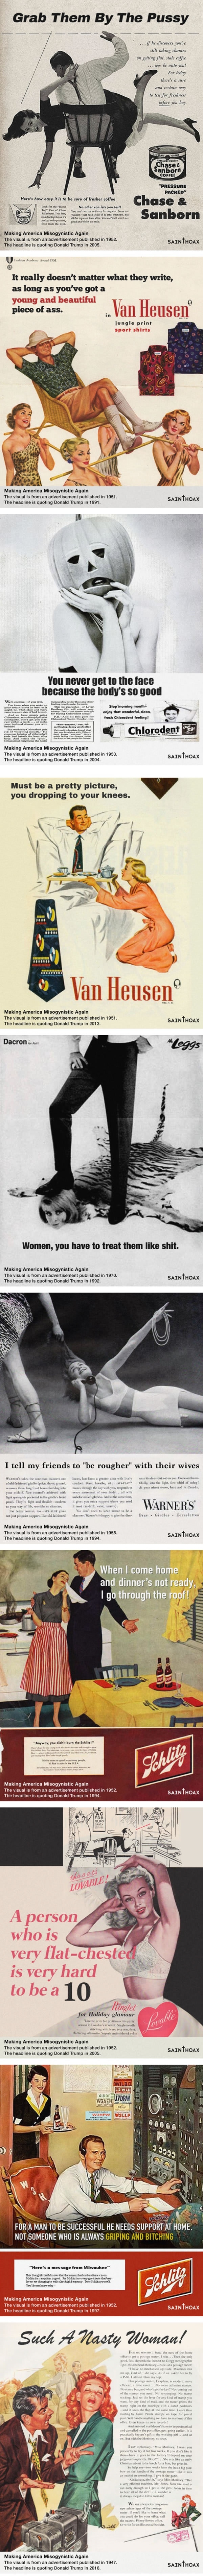 Headlines of s*xist 50s ads replaced with Trump's quotes